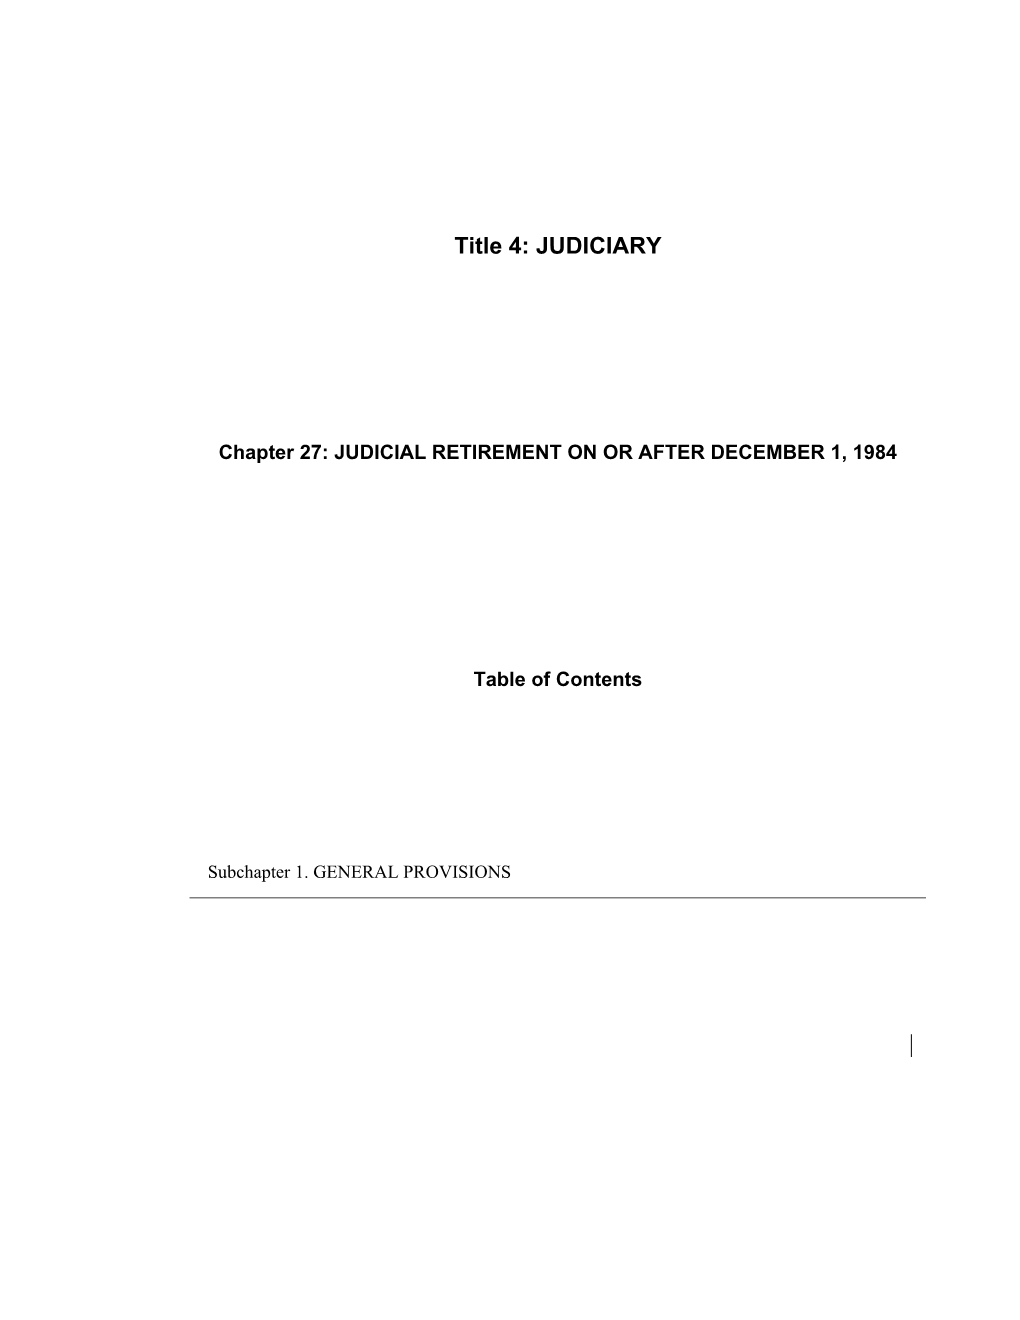 MRS Title 4, Chapter27: JUDICIAL RETIREMENT on OR AFTER DECEMBER 1, 1984